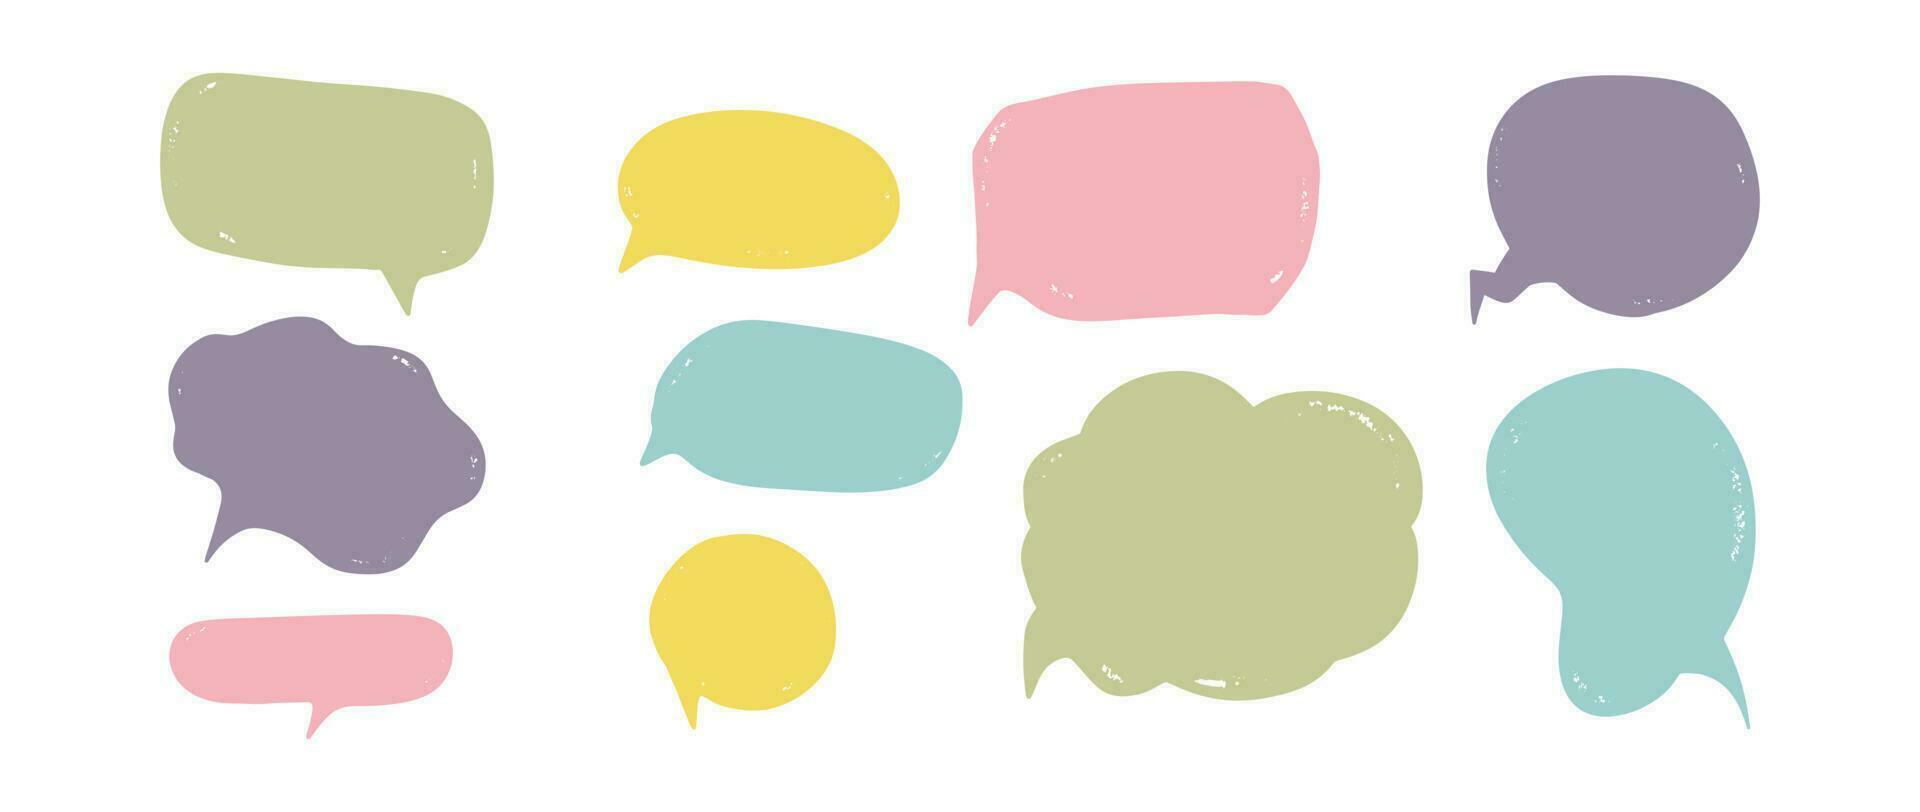 Speech bubbles message set. Collection of grunge doodle bubble sketch isolated on white background. Vector illustration